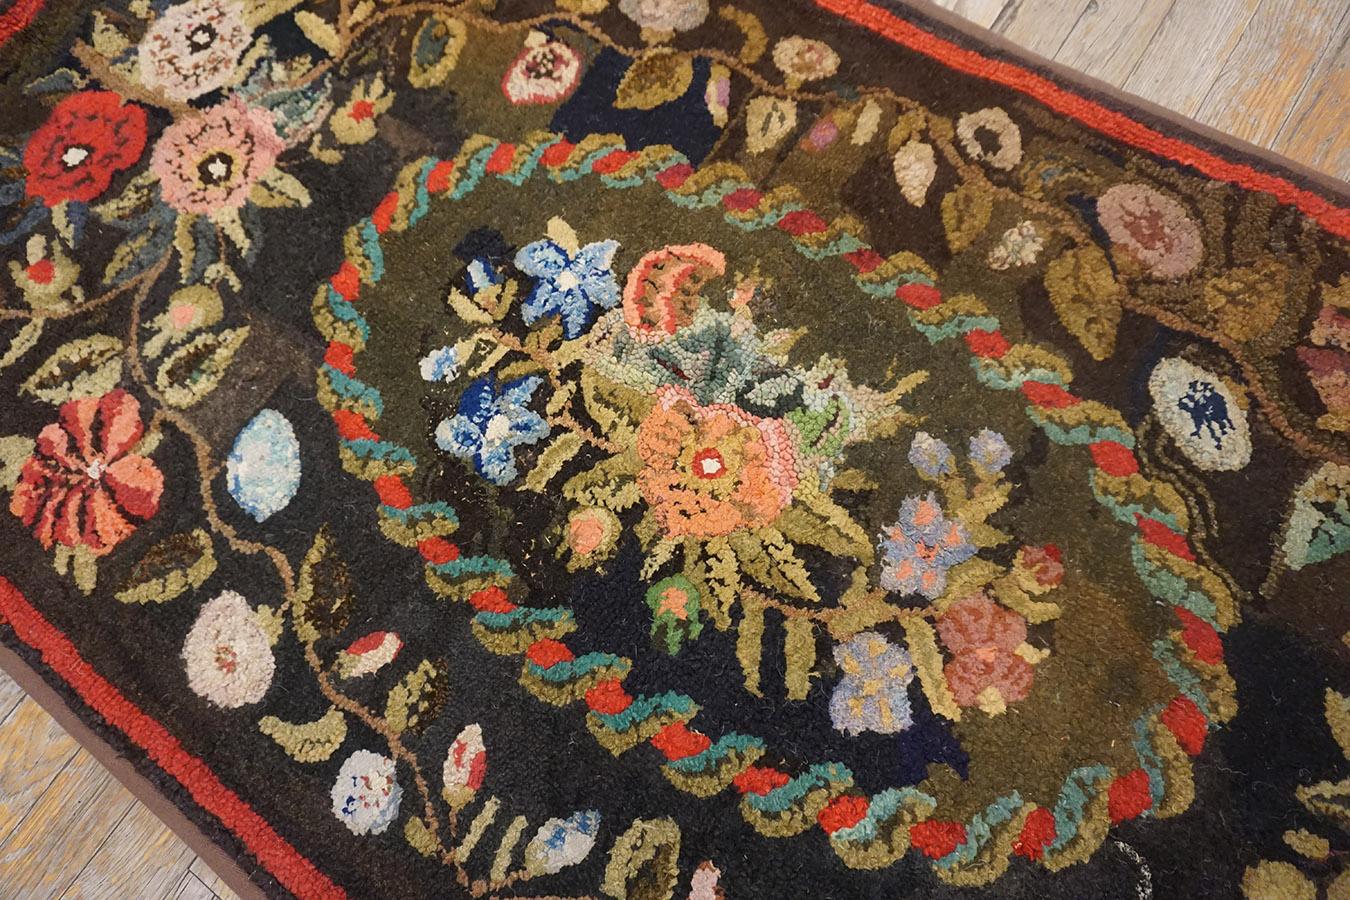 Late 19th Century 19th Century American Hooked Rug 2' 6